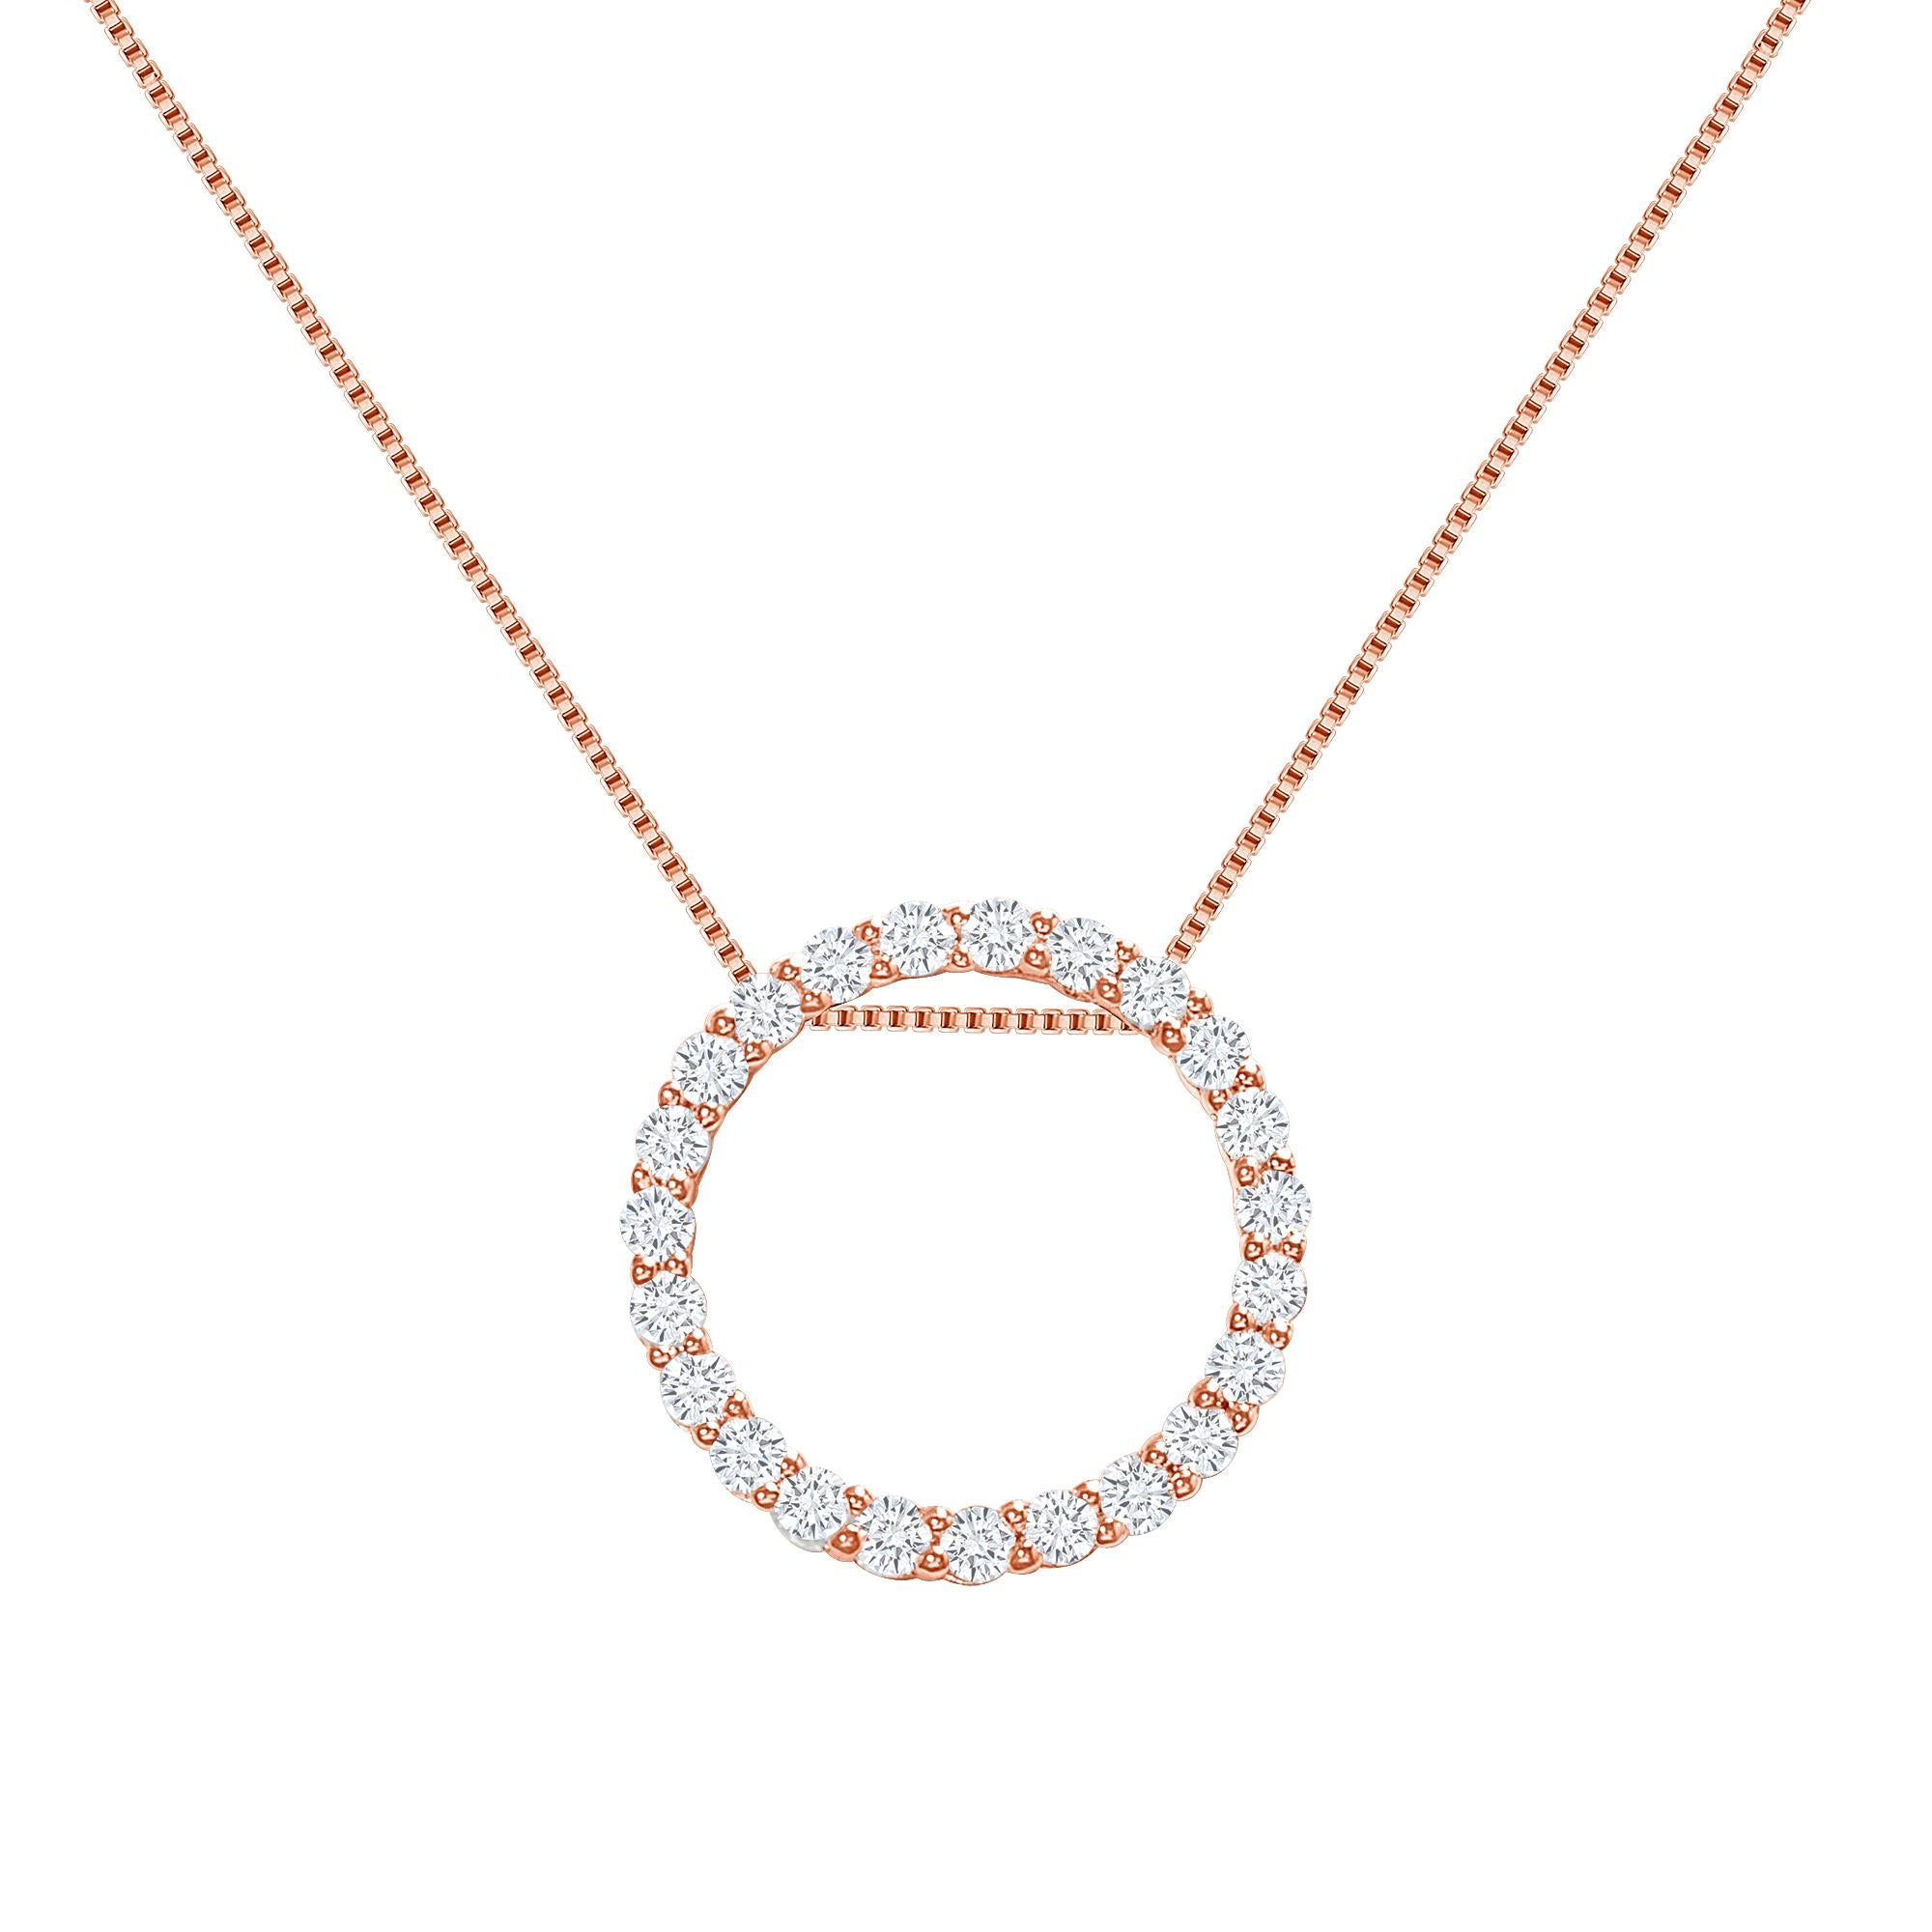 This diamond circle pendant provides a glowing chic look.
Metal: 14k Gold
Diamond Total Carats: 3 carat
Diamond Cut: Round Natural Diamonds (Not Lab Grown)
Diamond Clarity: VS
Diamond Color: F-G
Color: Rose Gold
Necklace Length: 14 inches